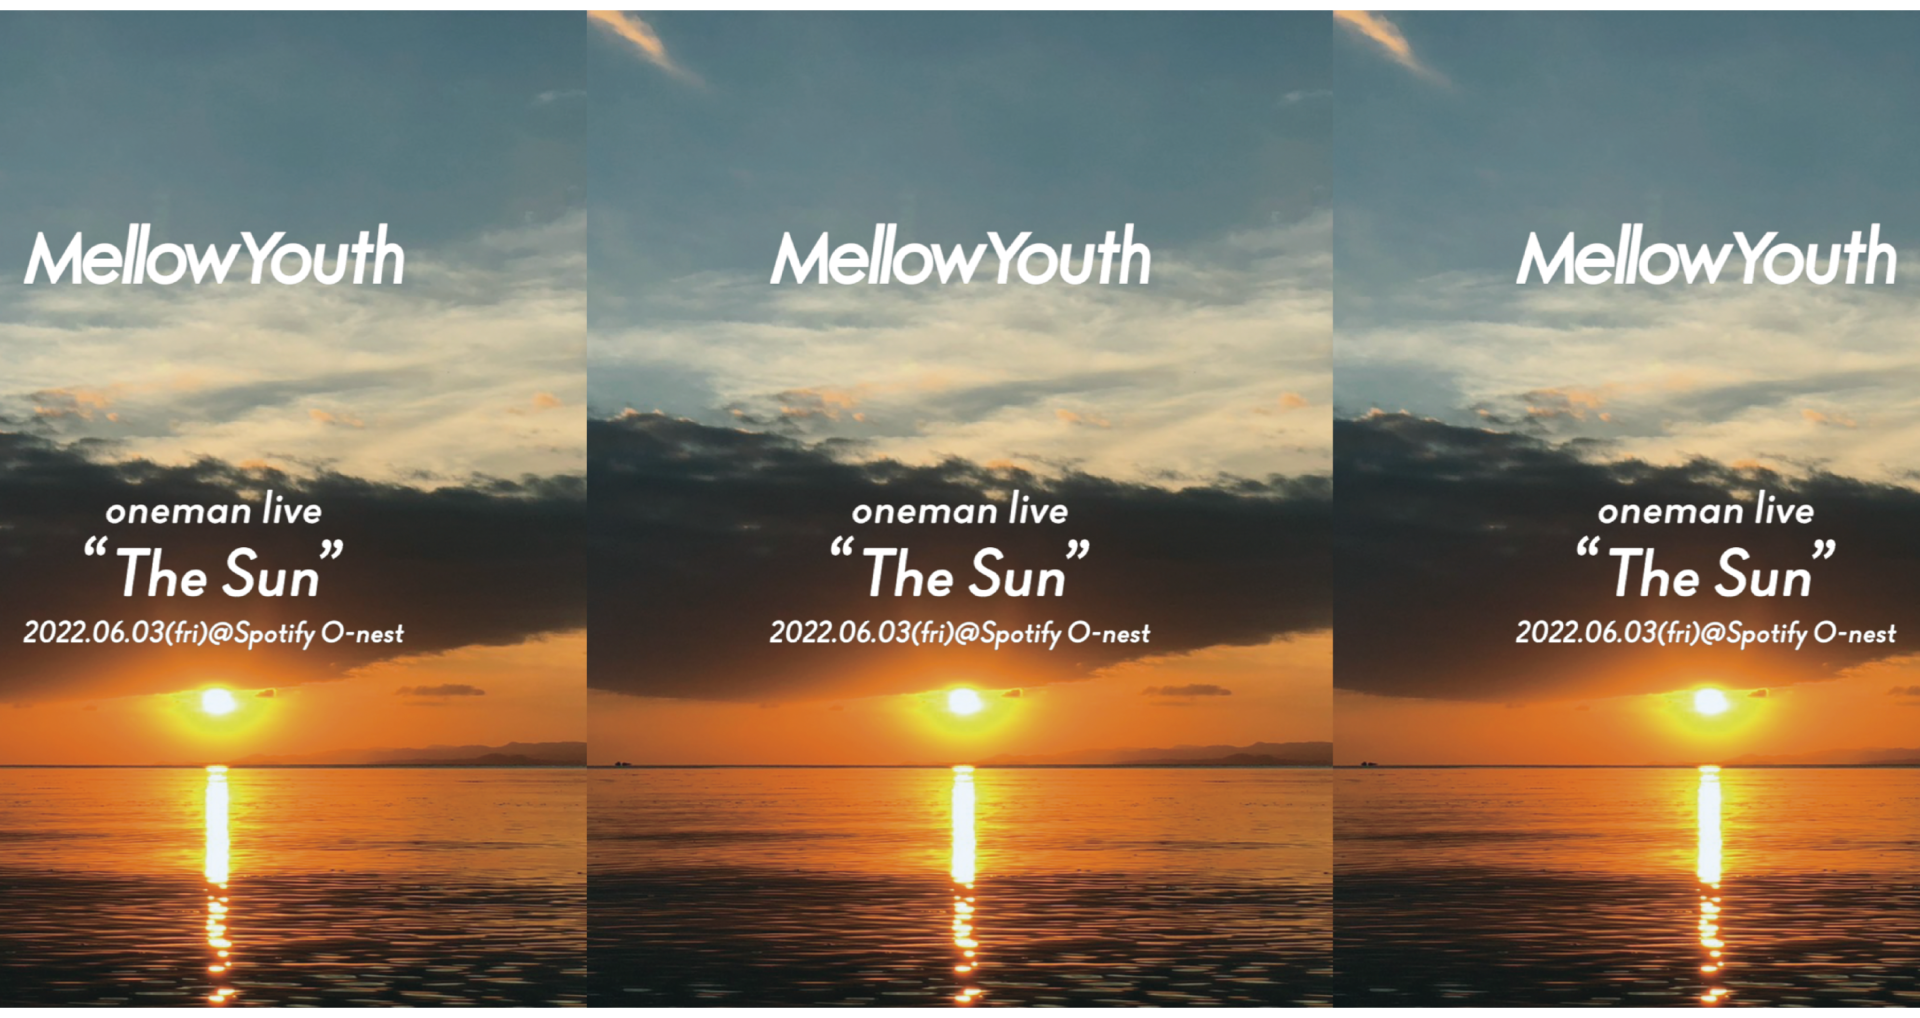 Mellow Youth ONEMAN LIVE “The Sun”